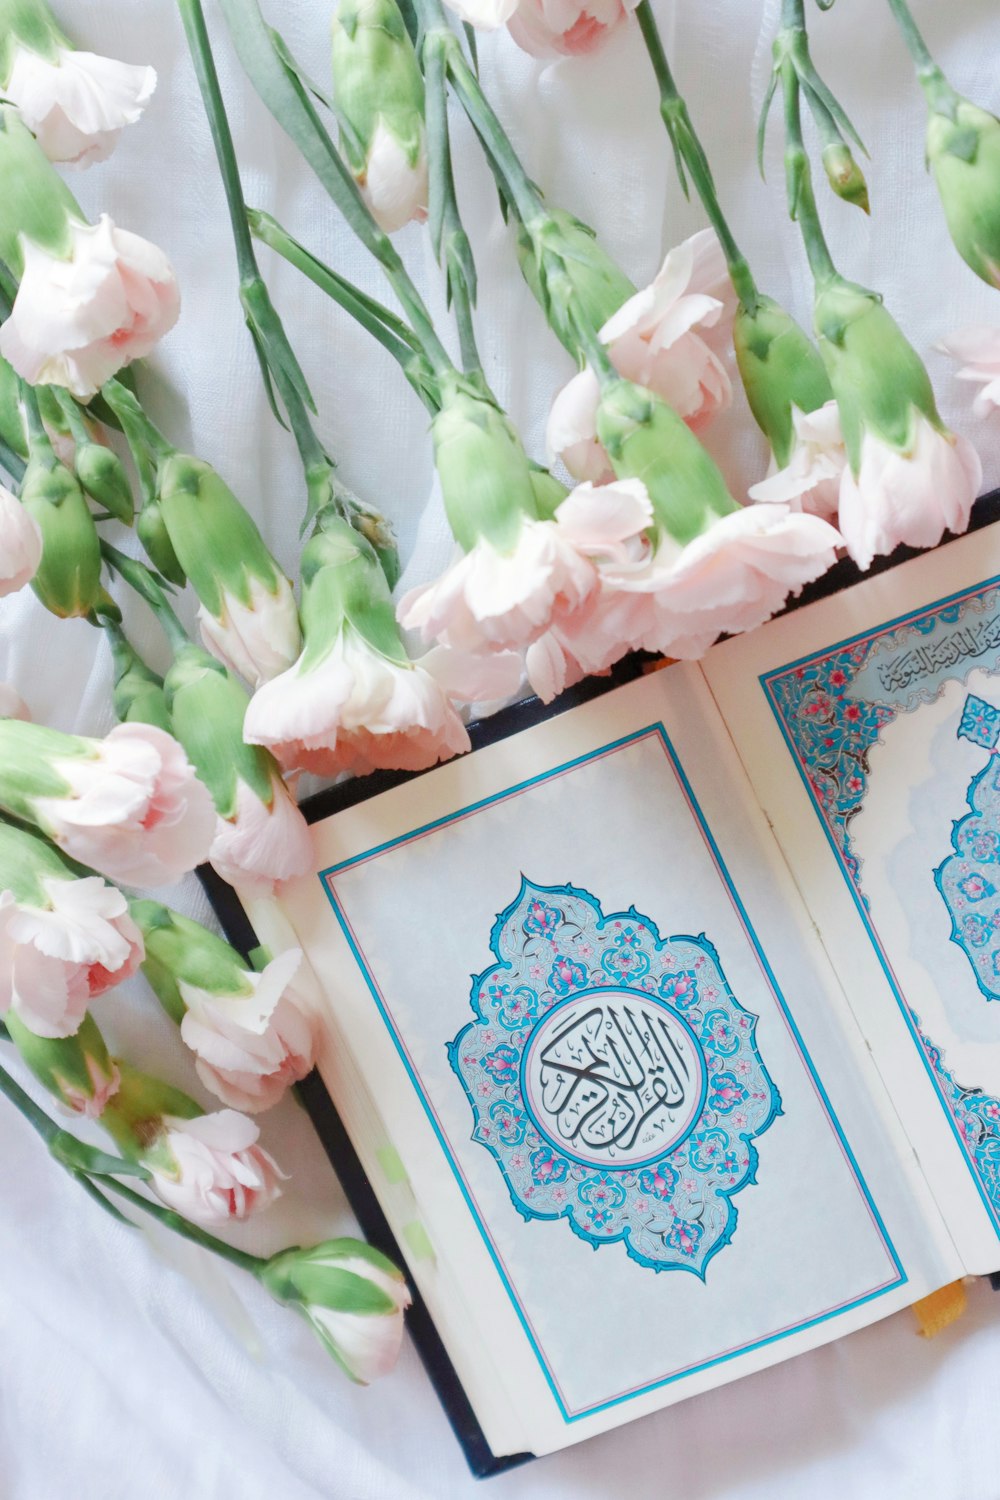 pink and white roses on blue and white floral box